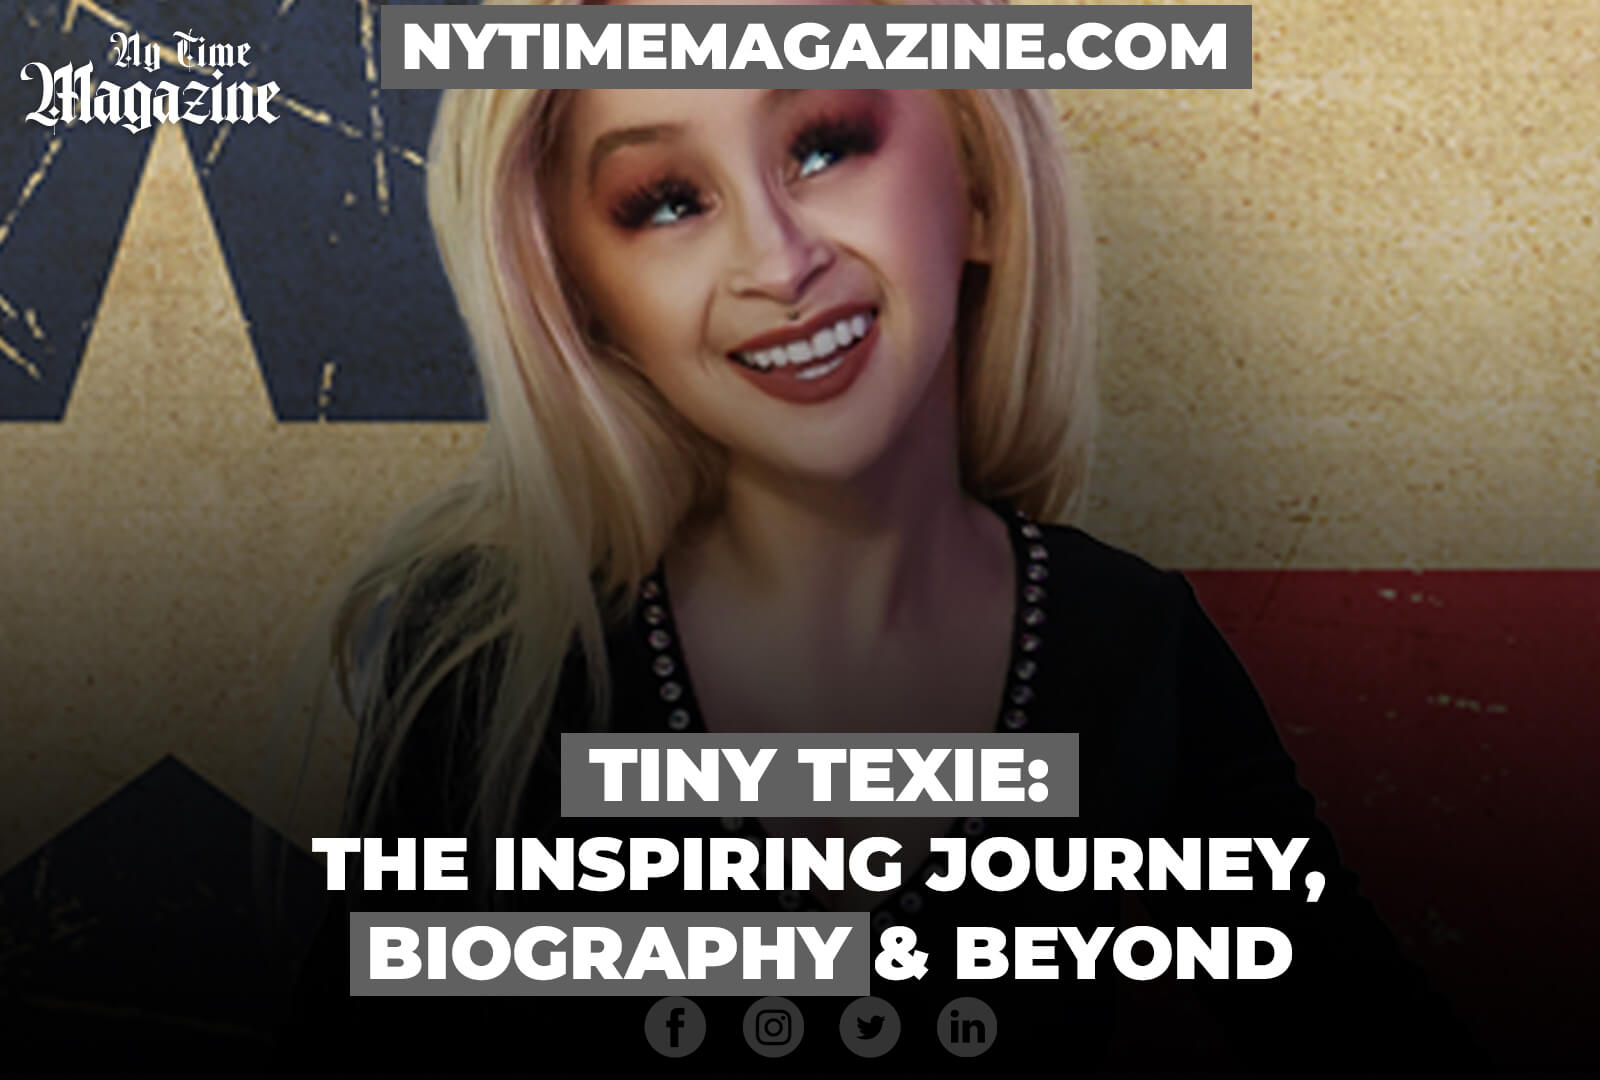 TINY TEXIE: THE INSPIRING JOURNEY, BIOGRAPHY AND BEYOND